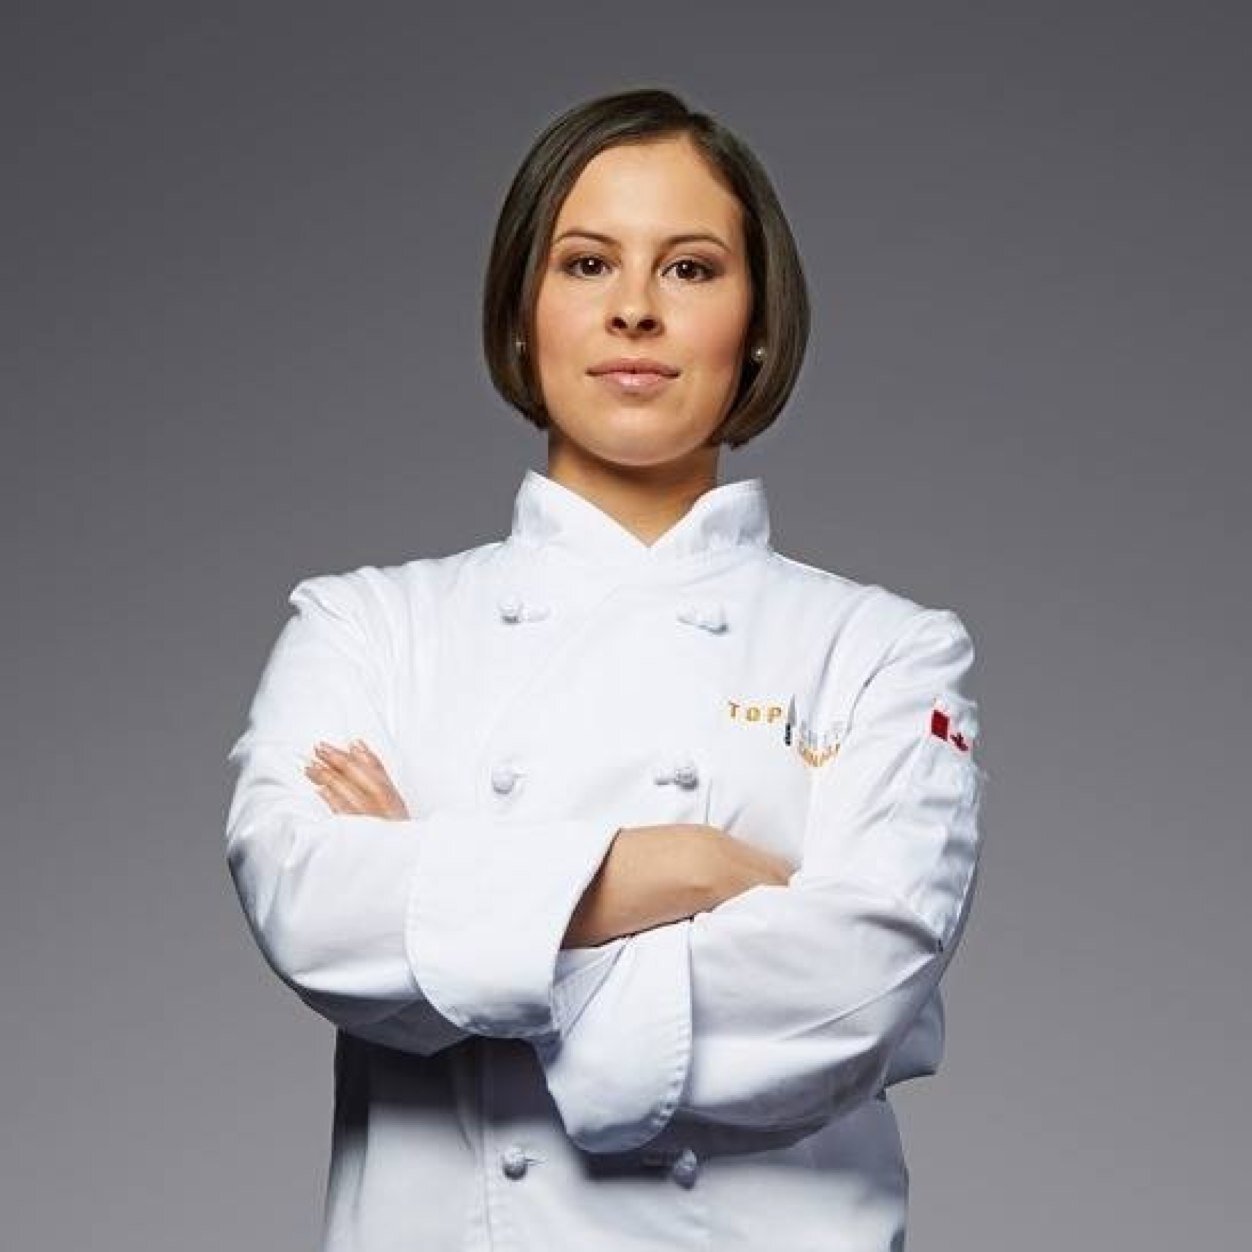 Passionate about food, Professional swimmer Top Chef Canada Season 4 Competitor